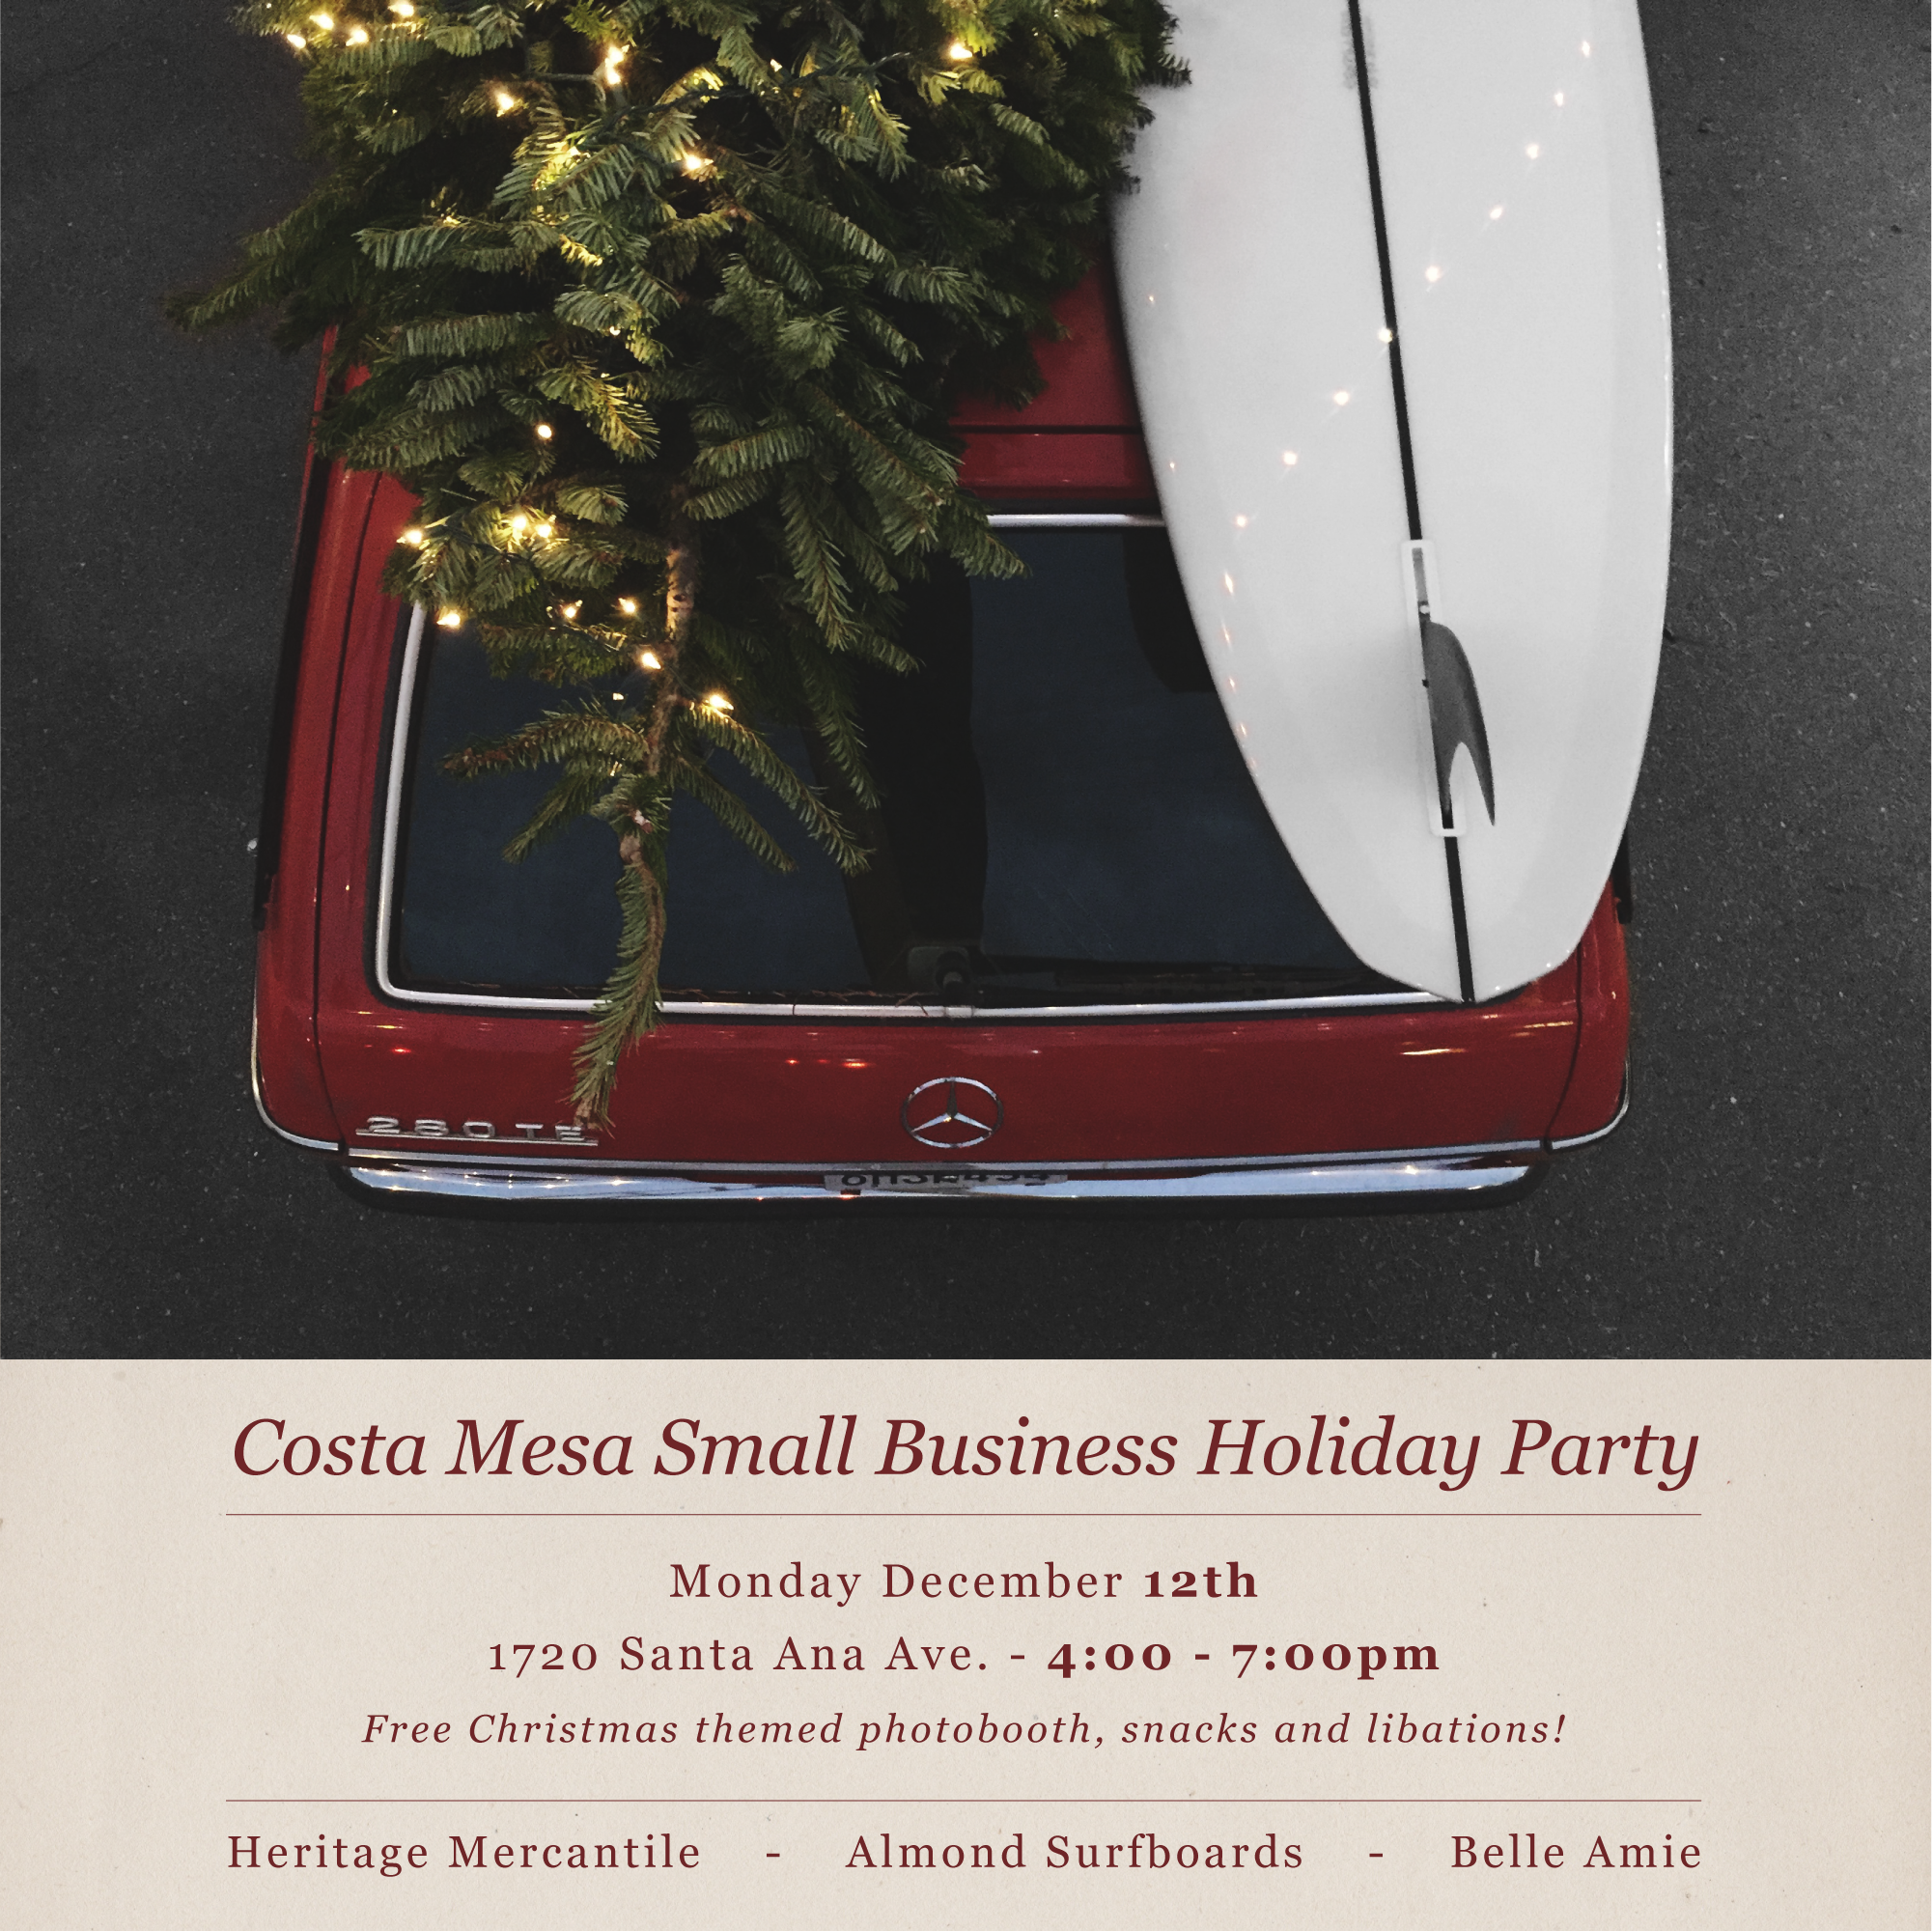 Costa Mesa Small Business Holiday Party